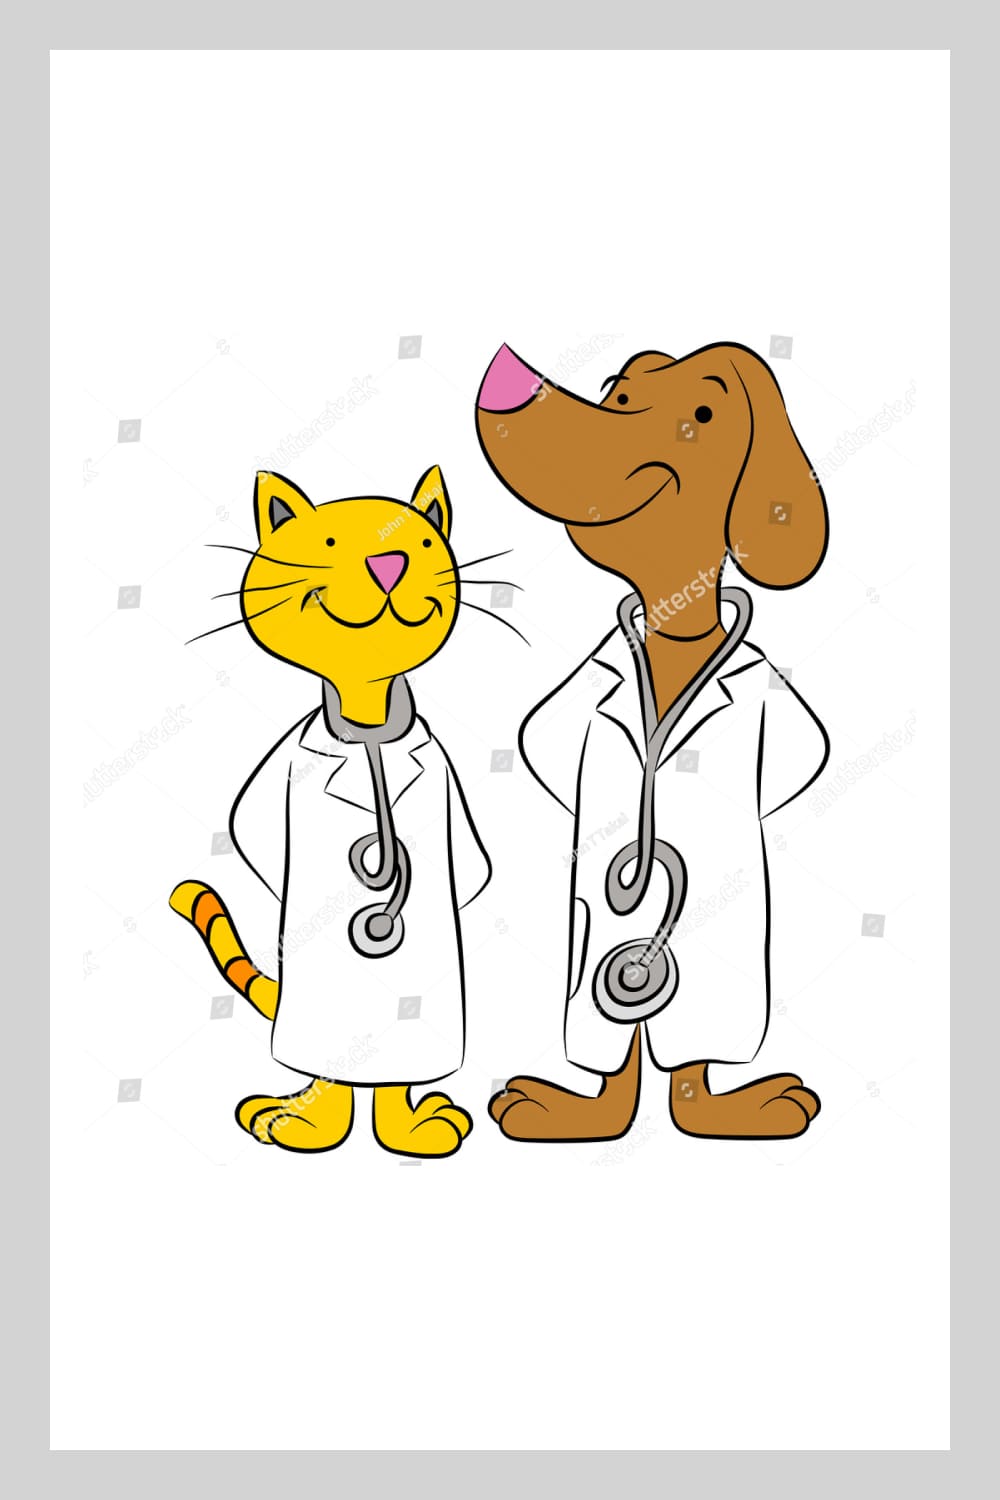 An image of a cat and dog dressed as pet doctors.